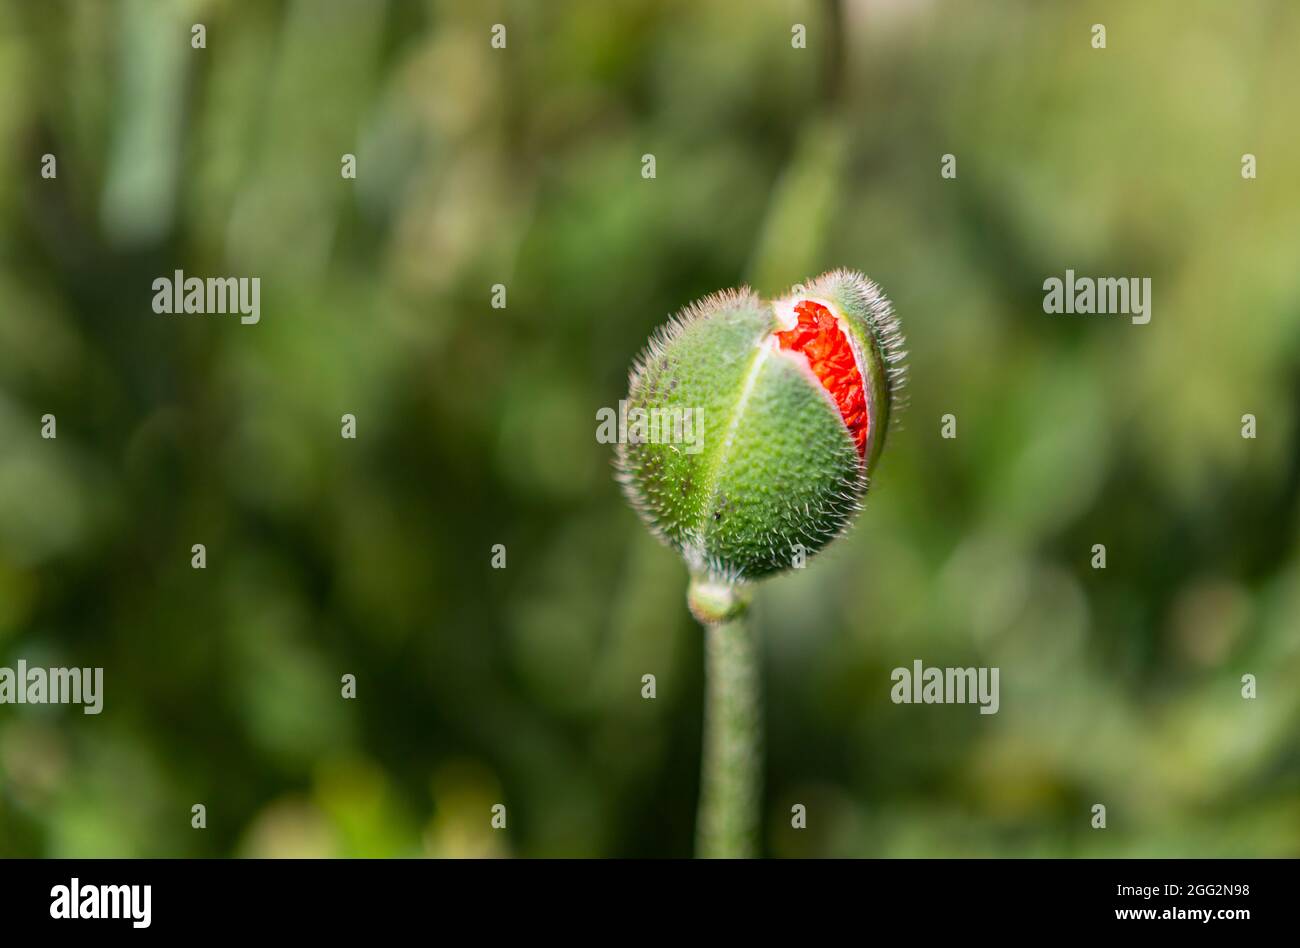 The photo shows natural closed poppies with green background Stock Photo